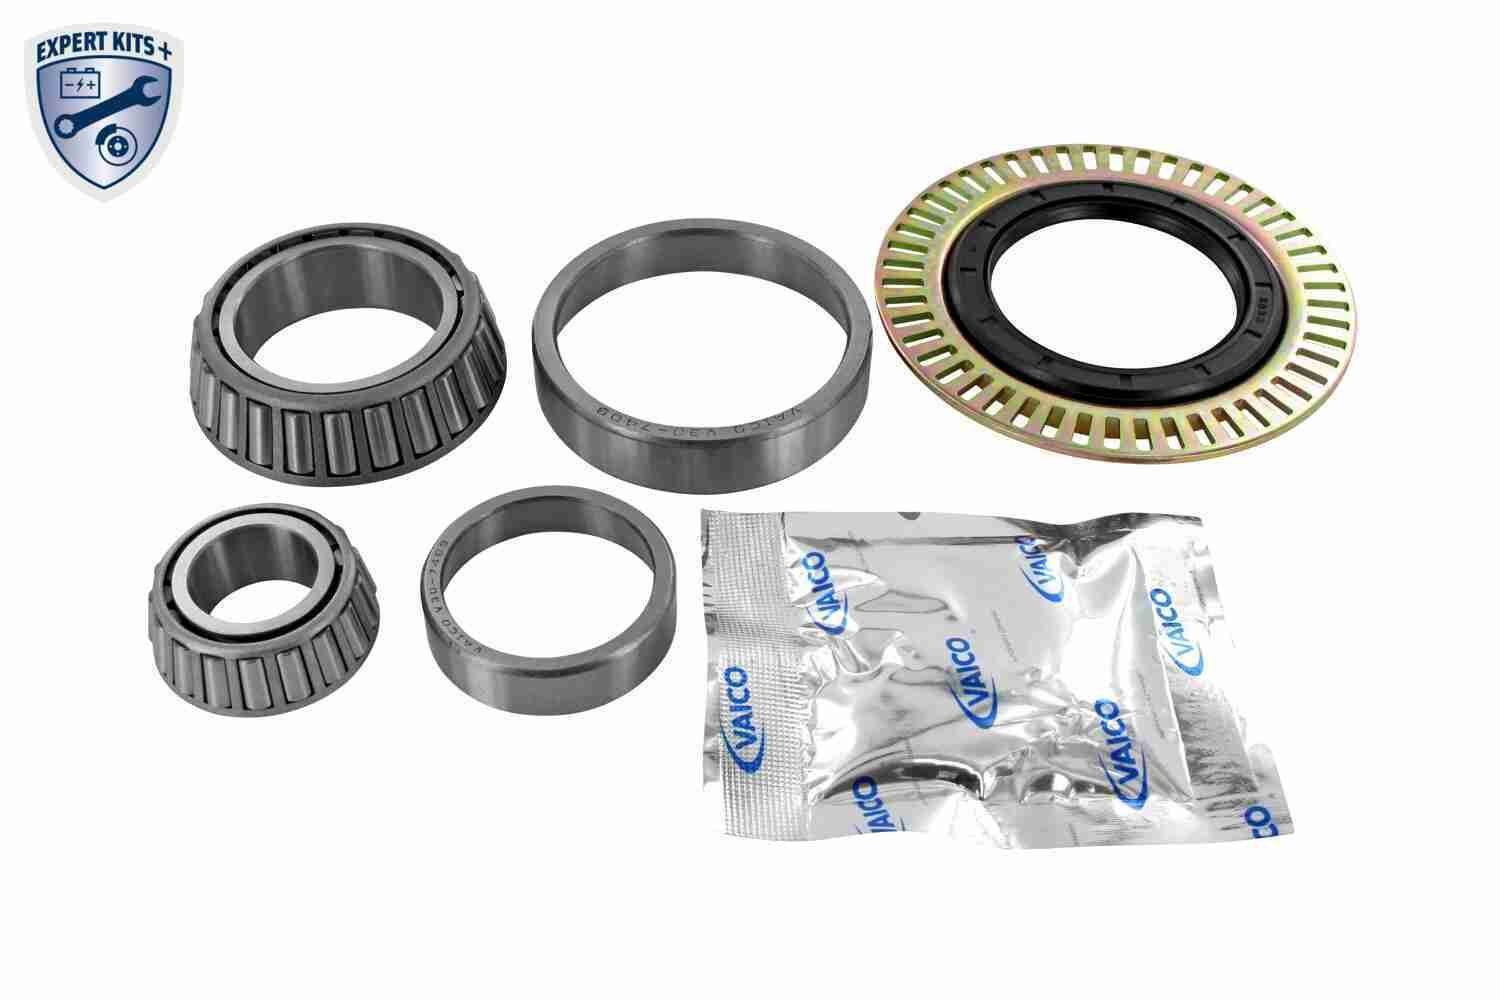 VAICO V30-7409 Wheel bearing kit Front Axle, with accessories, EXPERT KITS +, with ABS sensor ring